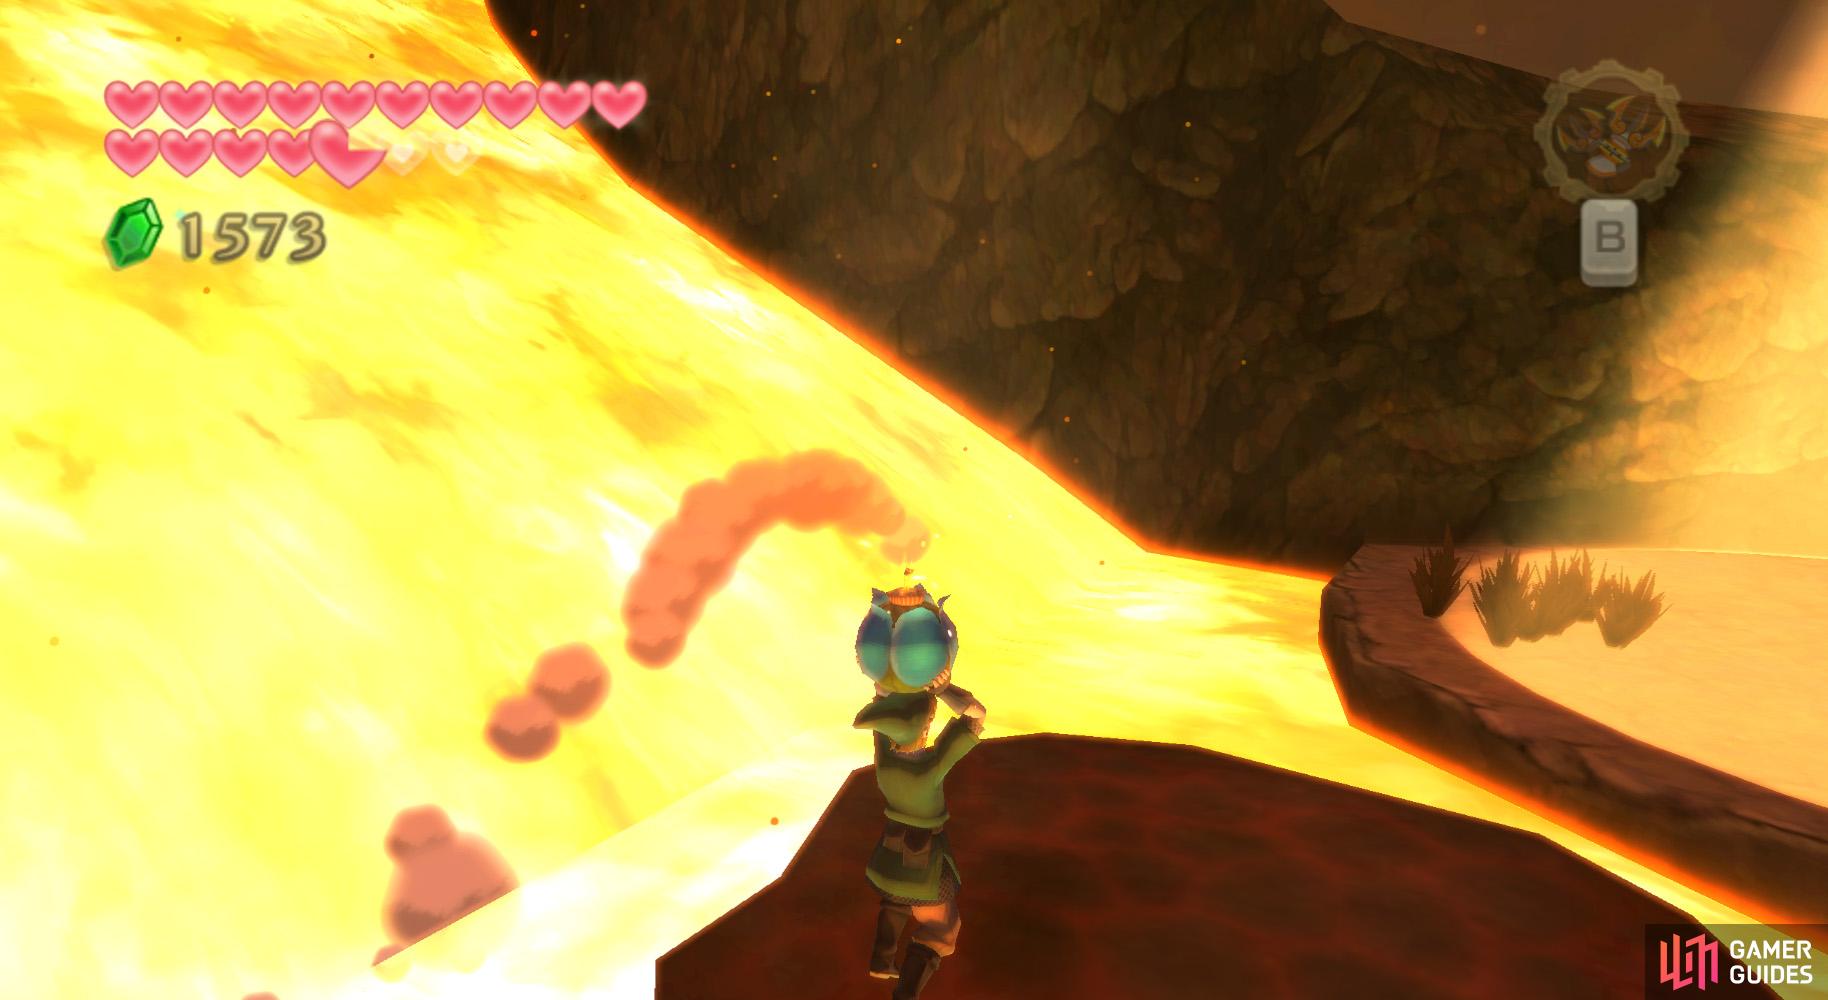 Carrying the Bomb Flower, jump onto the magma platform and chuck the bomb across to the watchtower.